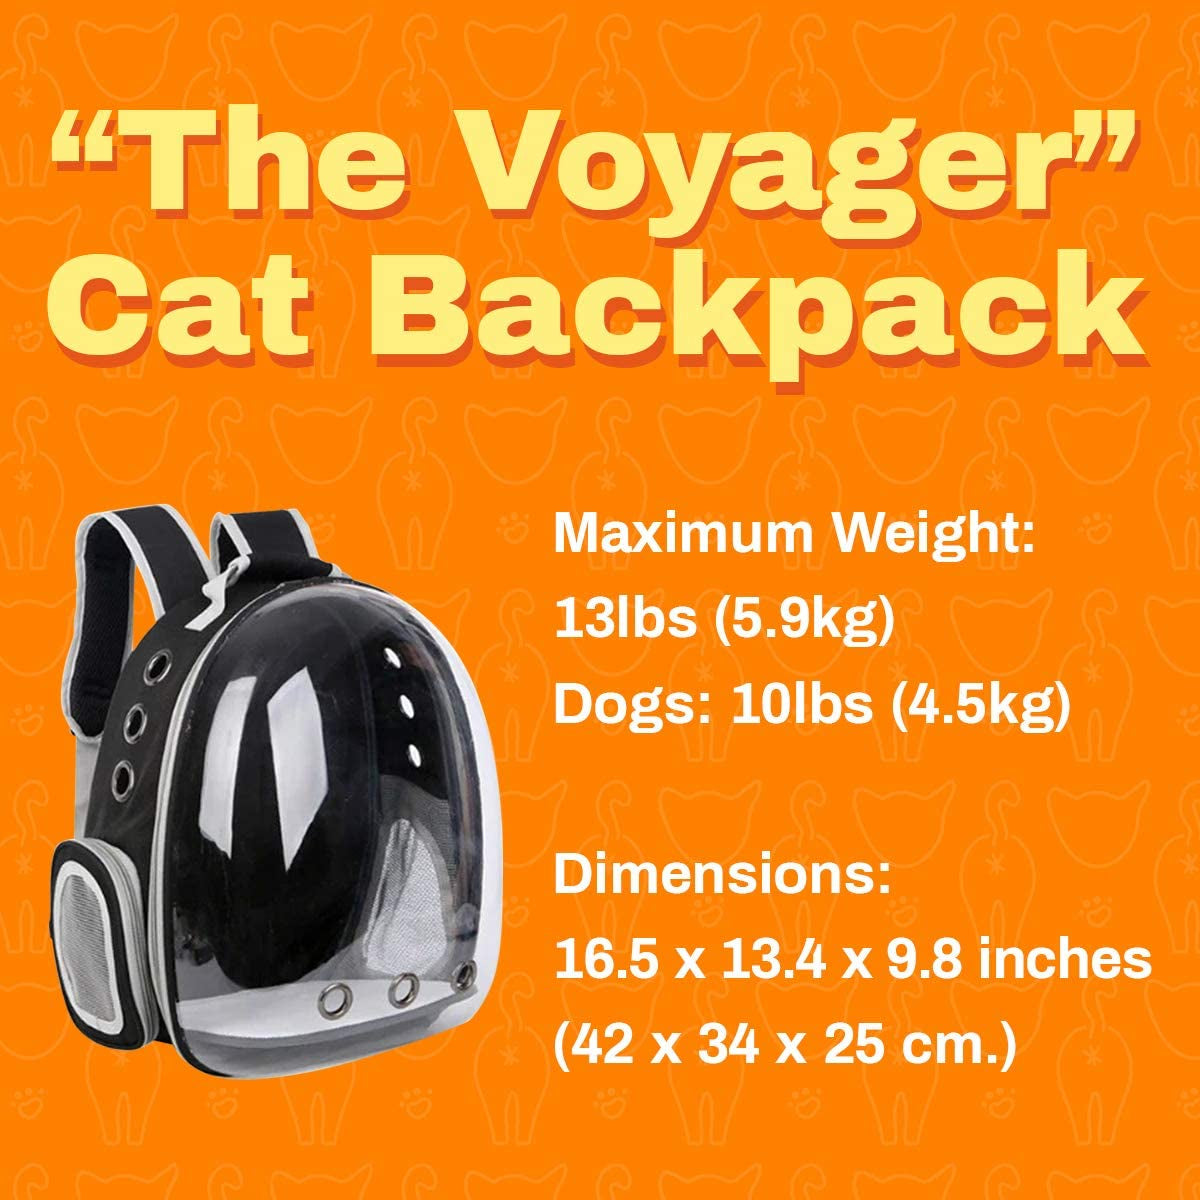 : the Voyager Cat Backpack - Premium Pet Carrier Bag for Travel and Hiking - Clear Hardshell Bubble Capsule Front with Two Entryways, Removable Mat, and Adjustable Straps